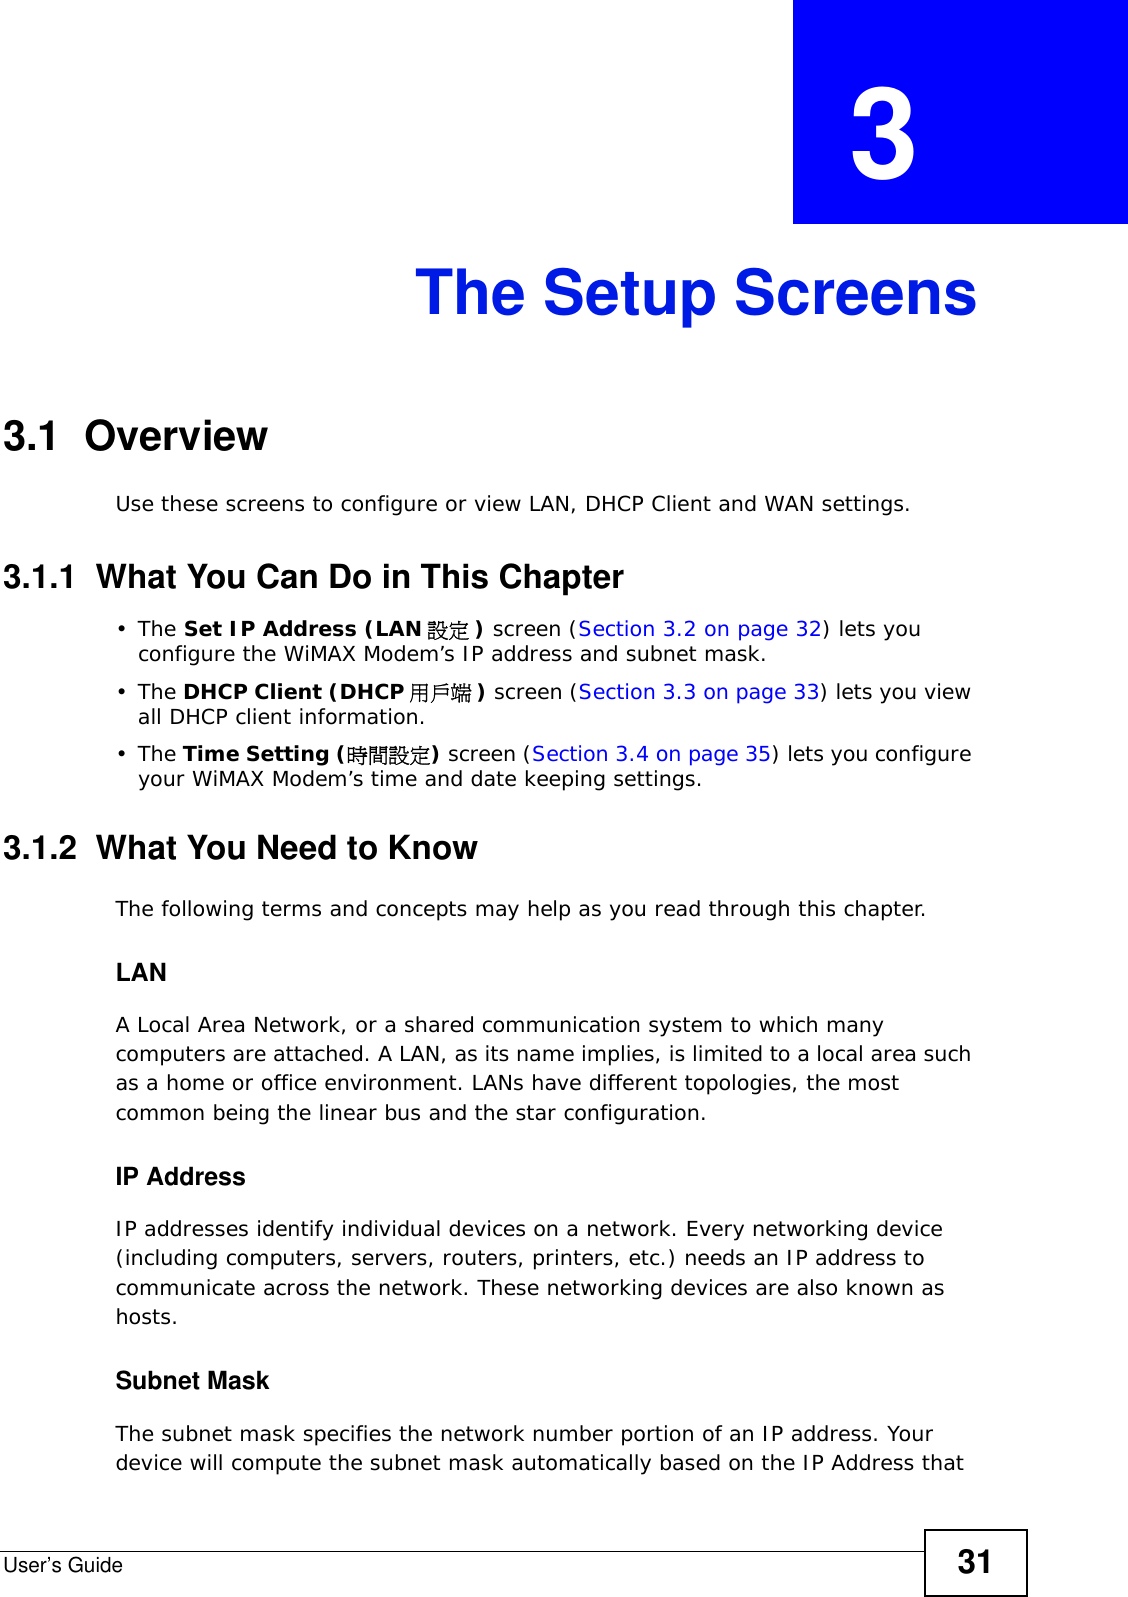 User’s Guide 31CHAPTER  3 The Setup Screens3.1  OverviewUse these screens to configure or view LAN, DHCP Client and WAN settings.3.1.1  What You Can Do in This Chapter•The Set IP Address (LAN 設定 ) screen (Section 3.2 on page 32) lets you configure the WiMAX Modem’s IP address and subnet mask.•The DHCP Client (DHCP 用戶端 ) screen (Section 3.3 on page 33) lets you view all DHCP client information.•The Time Setting (時間設定) screen (Section 3.4 on page 35) lets you configure your WiMAX Modem’s time and date keeping settings.3.1.2  What You Need to KnowThe following terms and concepts may help as you read through this chapter.LANA Local Area Network, or a shared communication system to which many computers are attached. A LAN, as its name implies, is limited to a local area such as a home or office environment. LANs have different topologies, the most common being the linear bus and the star configuration.IP AddressIP addresses identify individual devices on a network. Every networking device (including computers, servers, routers, printers, etc.) needs an IP address to communicate across the network. These networking devices are also known as hosts.Subnet MaskThe subnet mask specifies the network number portion of an IP address. Your device will compute the subnet mask automatically based on the IP Address that 